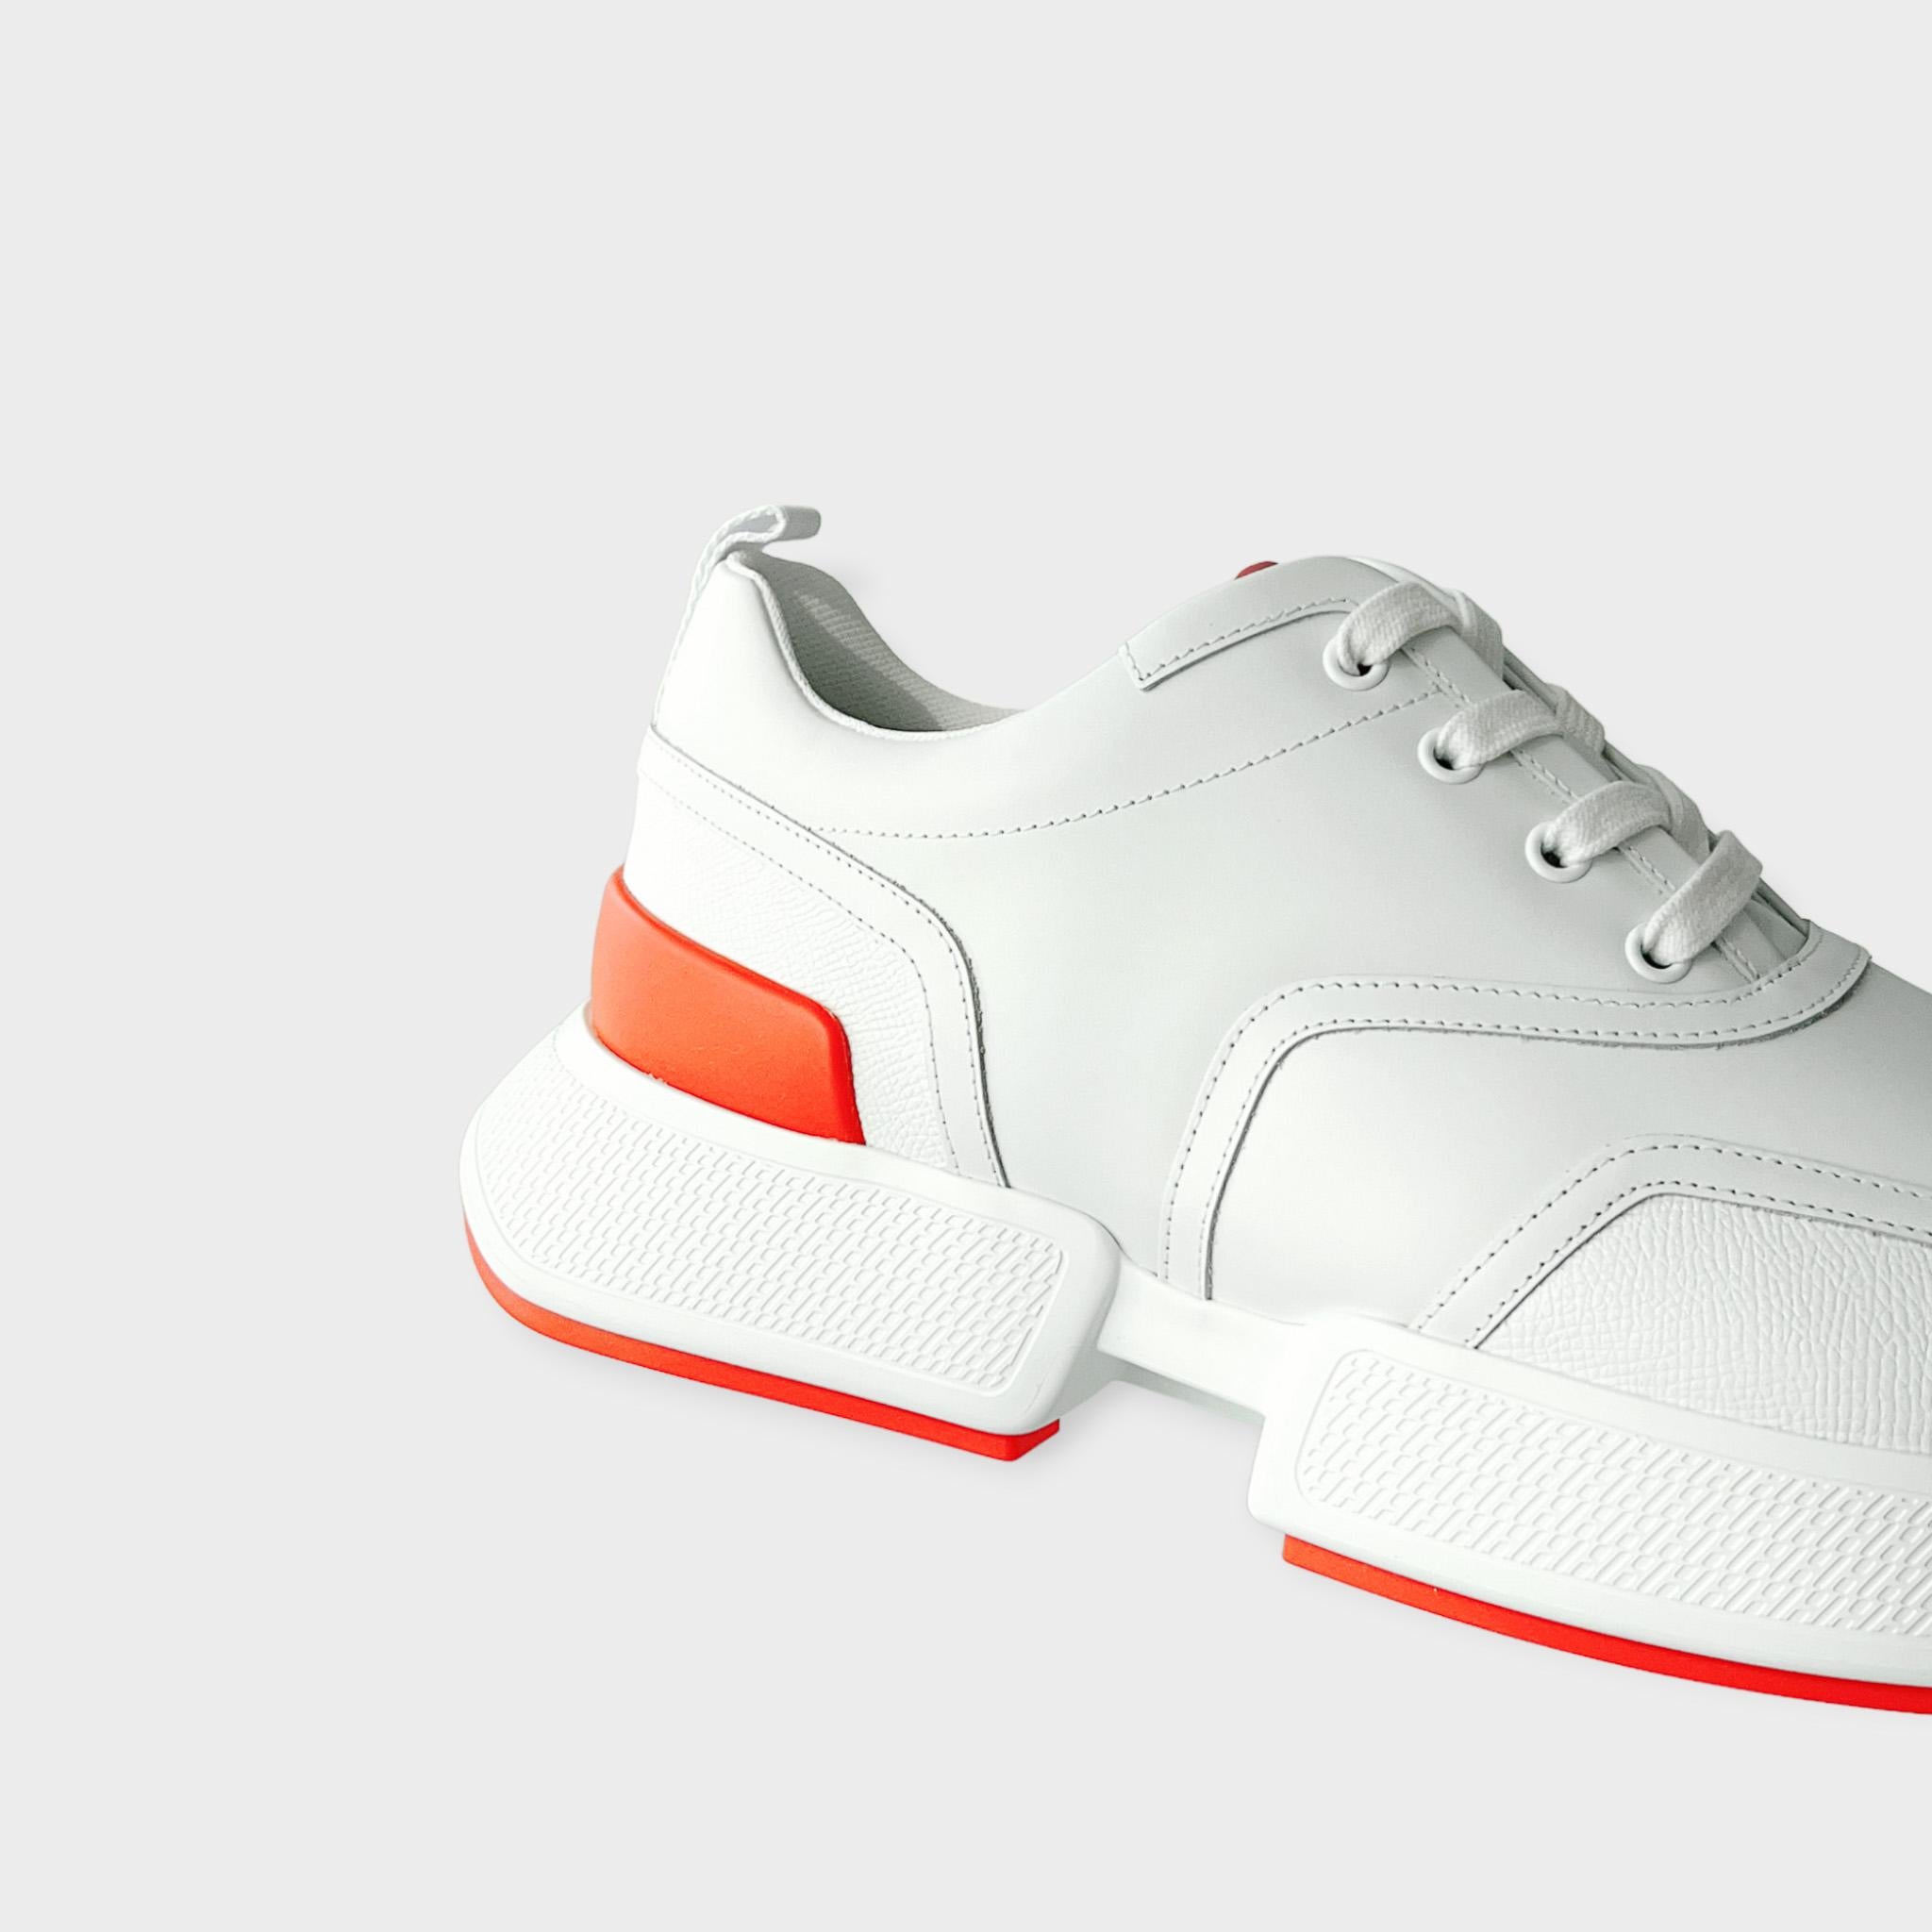 We have a beautiful pair of Men's Hermès Giga Sneakers in White featuring an orange sole. The Hermes Giga Sneaker is new for SS23 with an oversized sole to create a more young and modern look. 

Brand: Hermès

Colour: White (Blanc)

Material: